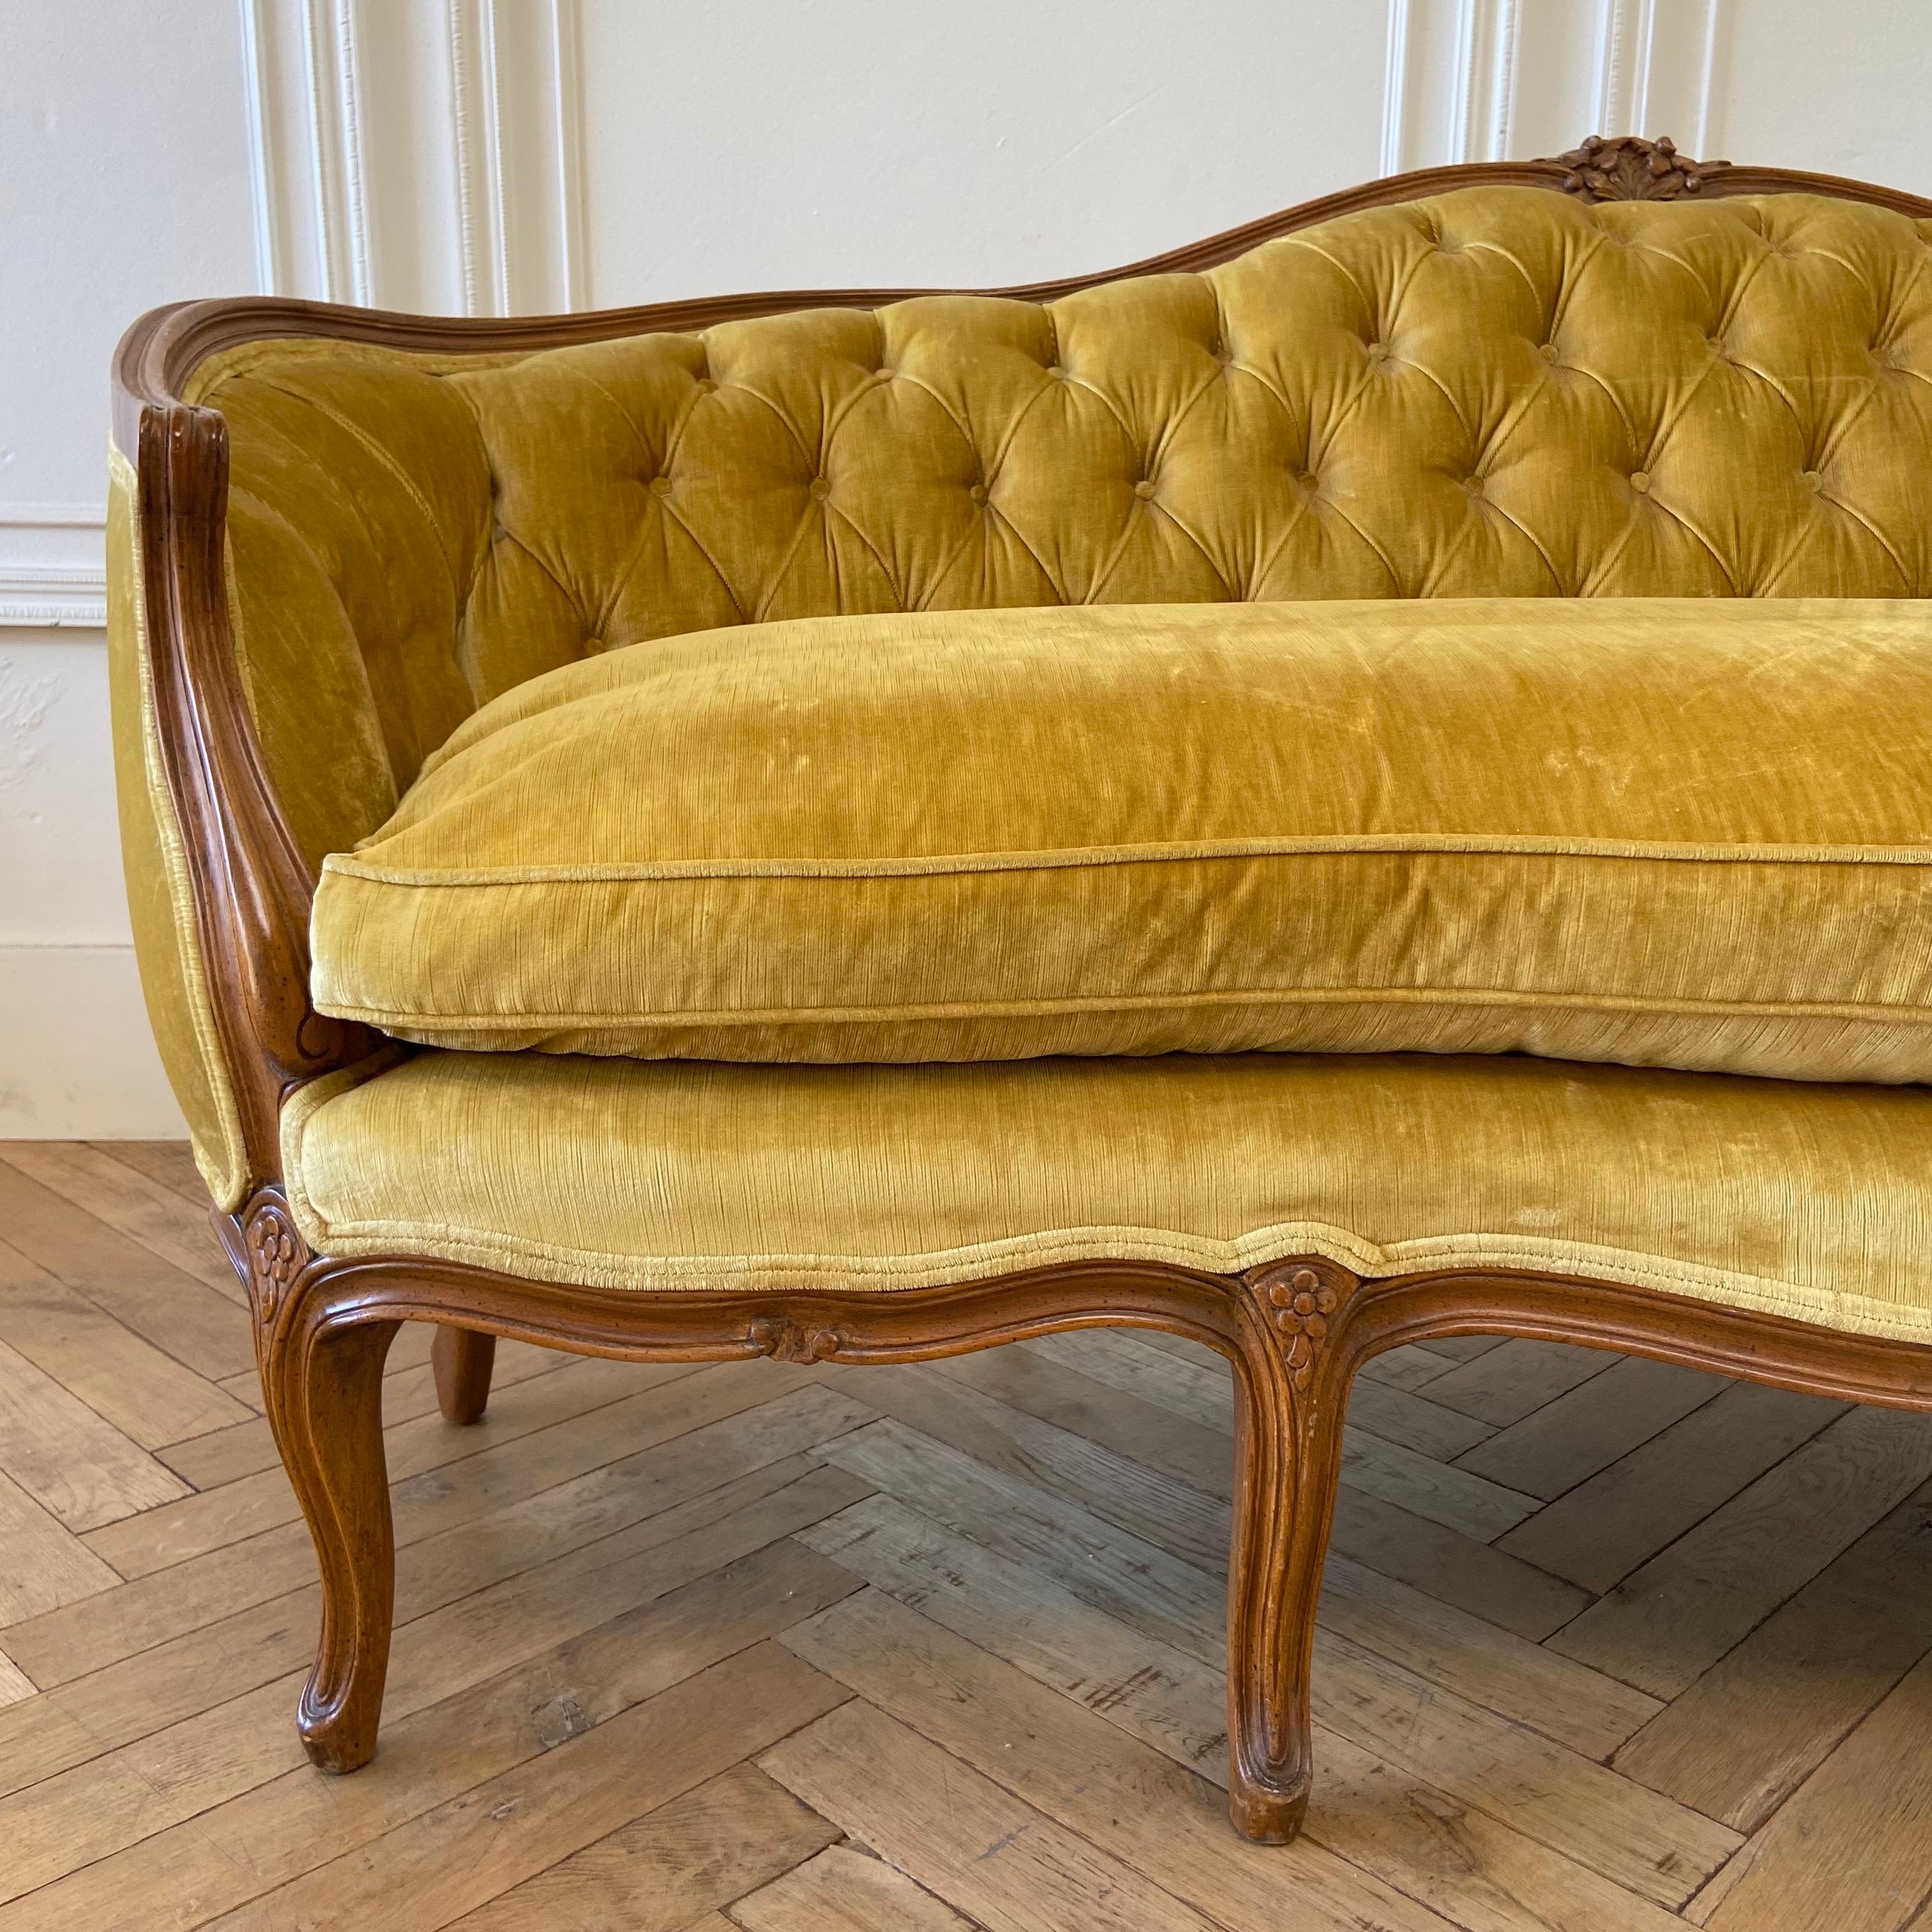 Vintage French Louis XV style sofa with velvet button tufted upholstery
Velvet sofa size: 78”W x 34”D x 35”H
SH: 19”. SD: 21”. AH: 26”
Down wrapped seat cushion
Solid and sturdy ready for everyday use.